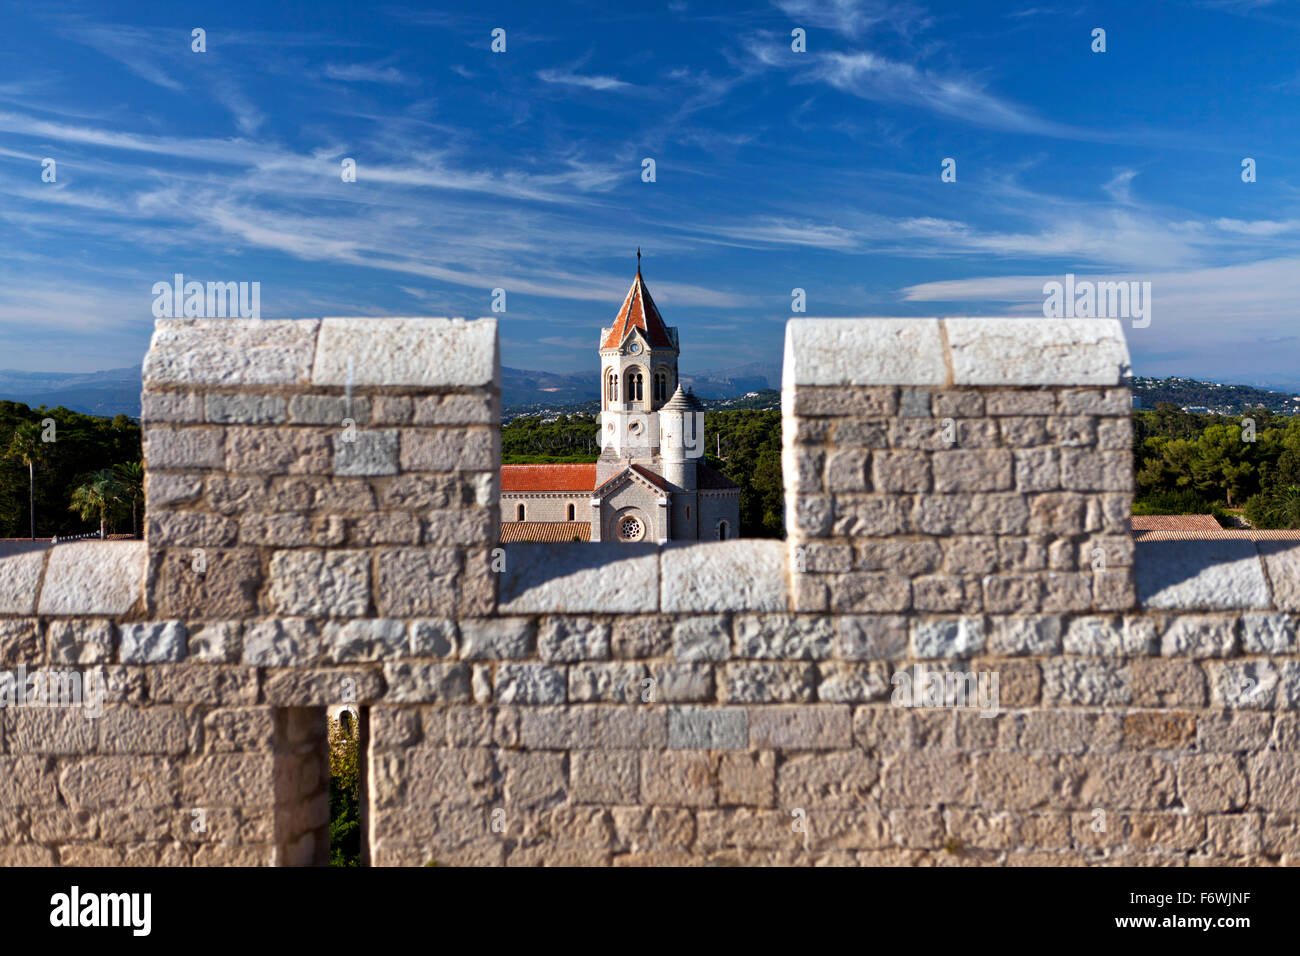 View of the Abbaye de Lerins from the fortified monastery on Ile Saint-Honorat, Cannes, France Stock Photo